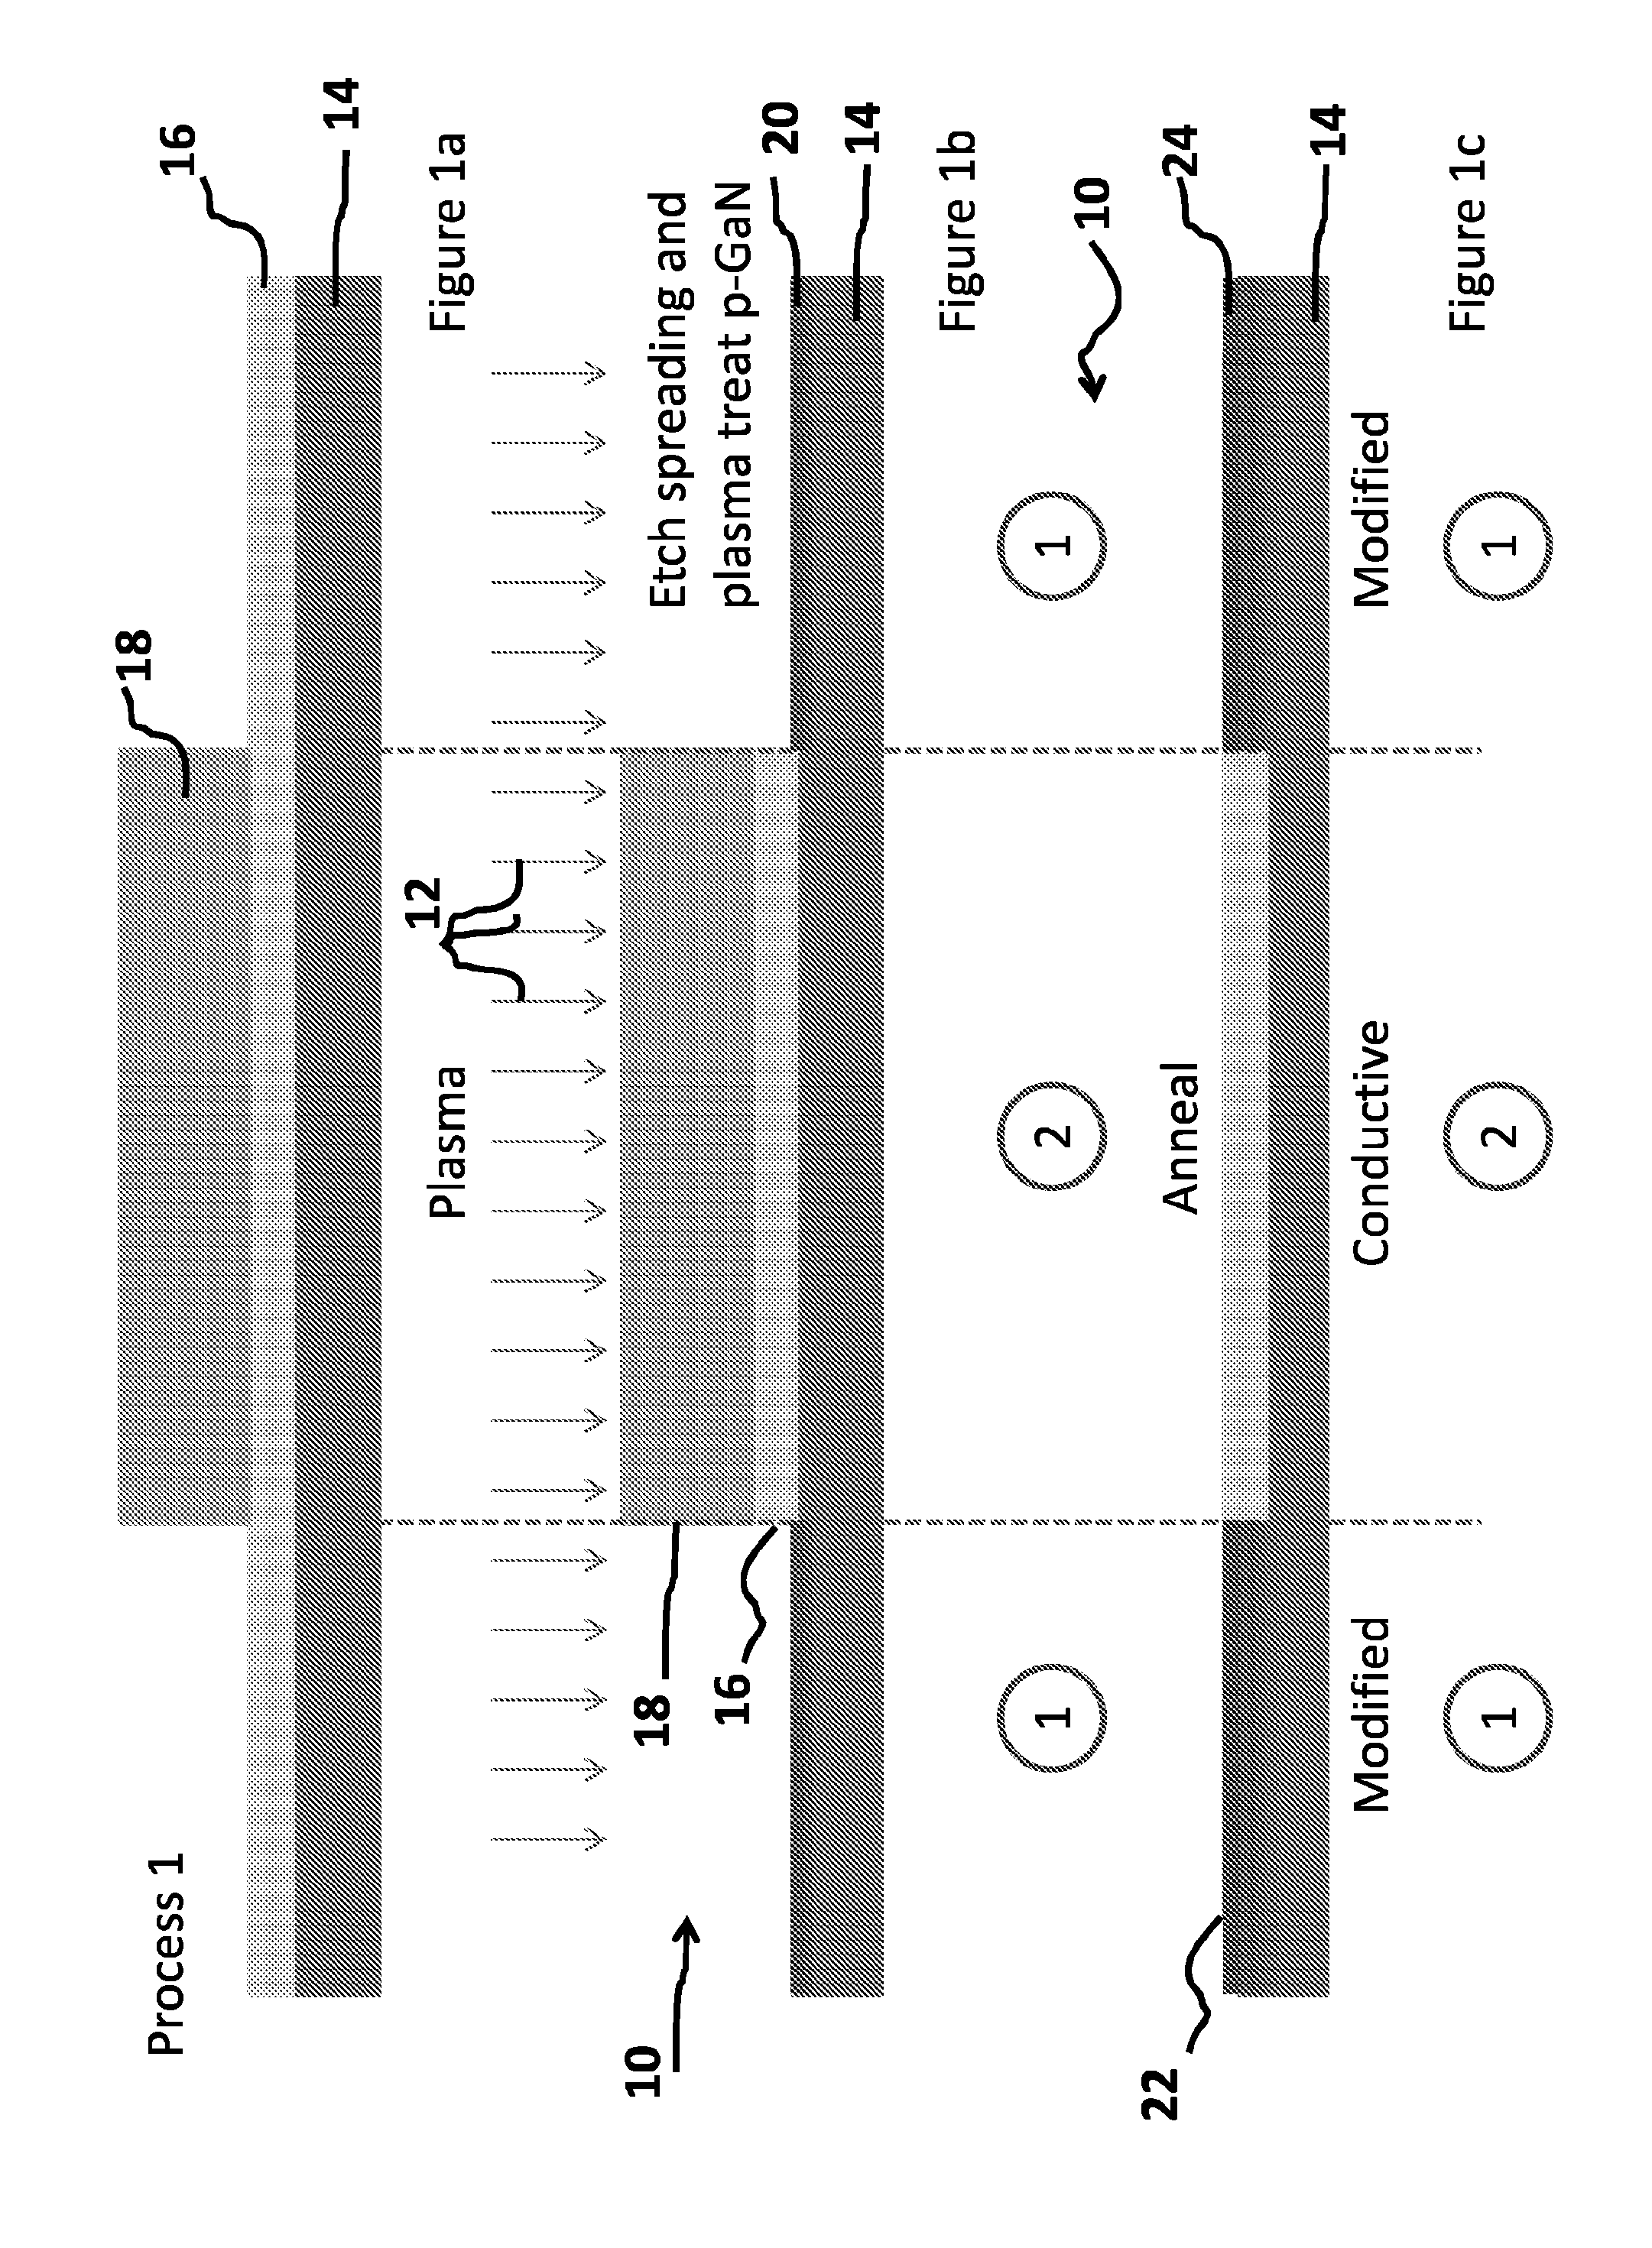 Semiconductor modification process and structures